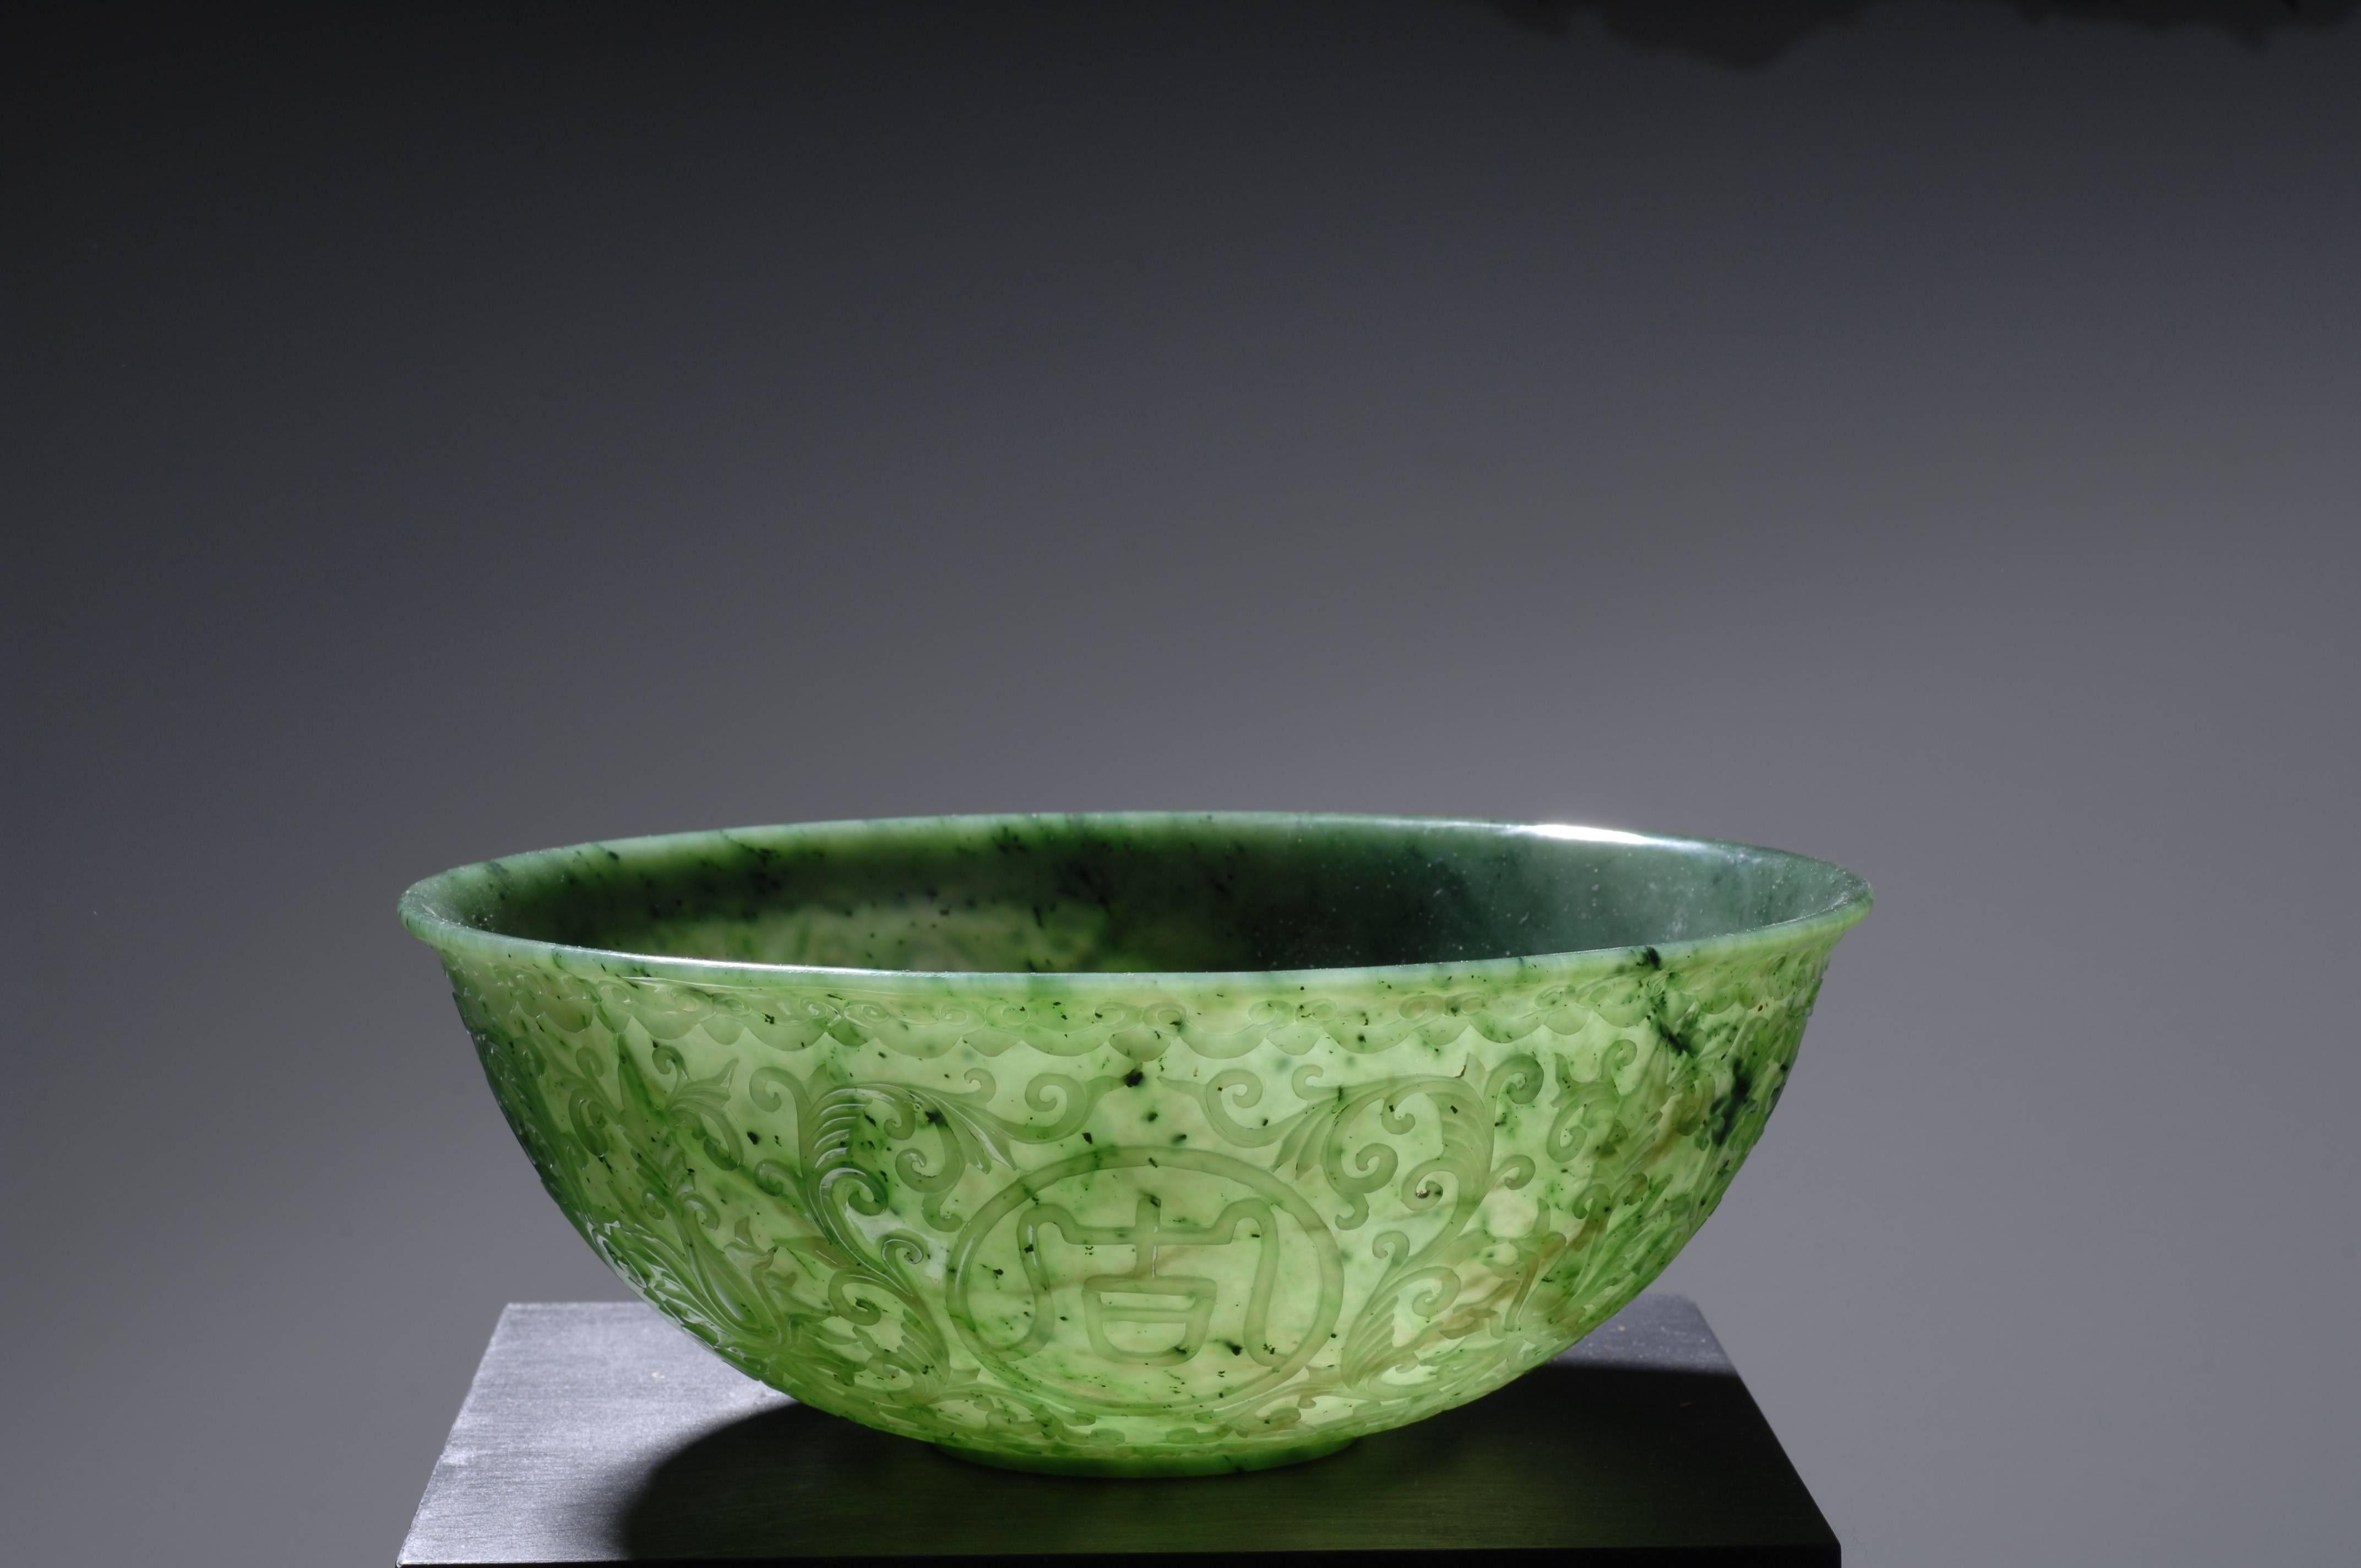 Mughal Style Green Jade Bowl, probably 19th century Chinese, the exterior is carved in low relief with scrolling vinery intersected by circular cartouches with characters; translation: Luck as your wishes, wishes as your luck